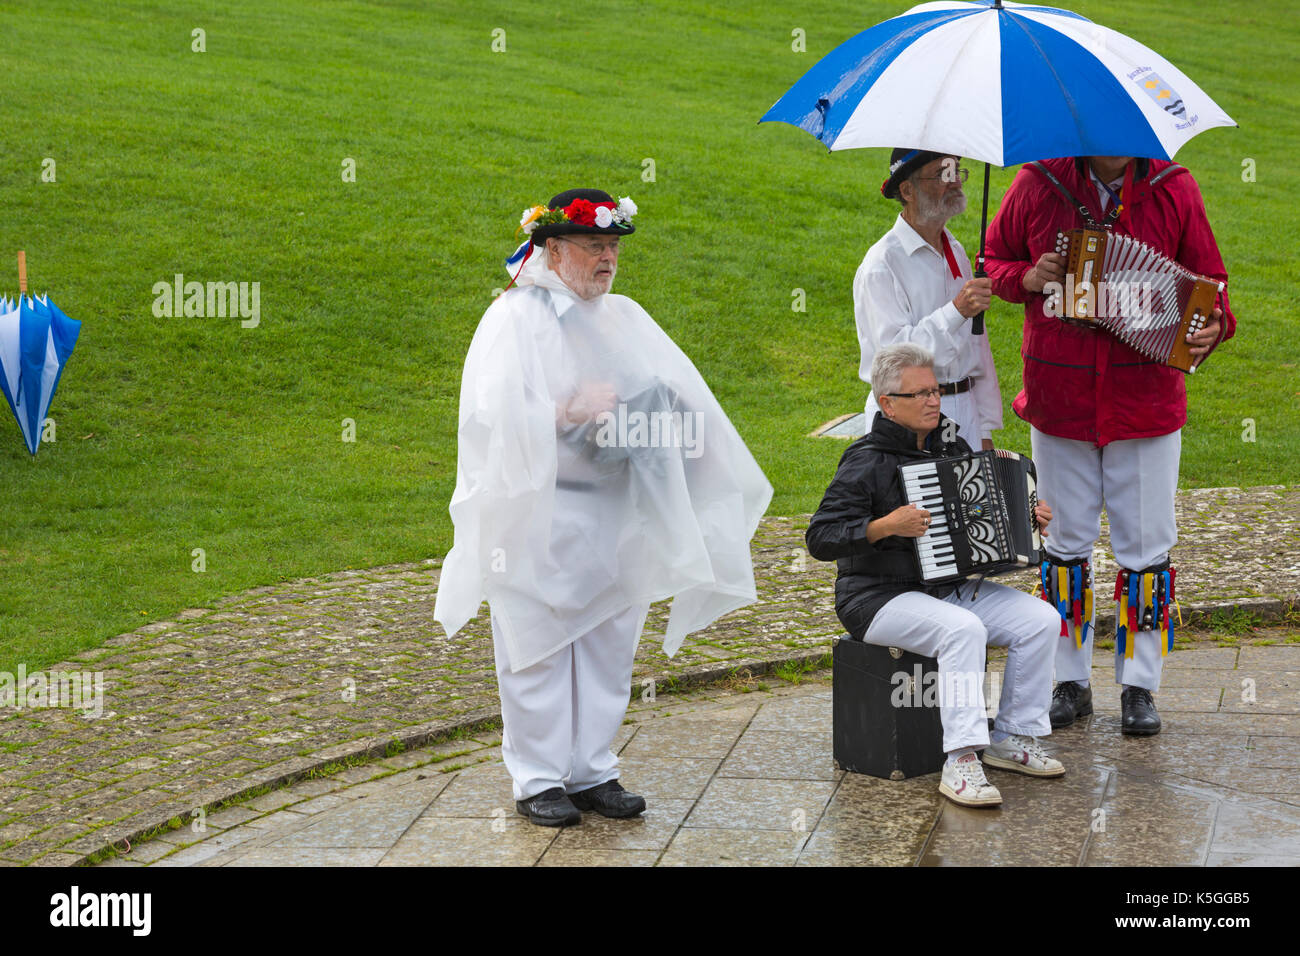 Swanage, Dorset, UK. 9th Sep, 2017. Crowds flock to the Swanage Folk Festival on the 25th anniversary to see the dance groups and music along the seafront. The mixed weather, sunshine and rain, doesn't deter their spirits. Credit: Carolyn Jenkins/Alamy Live News Stock Photo